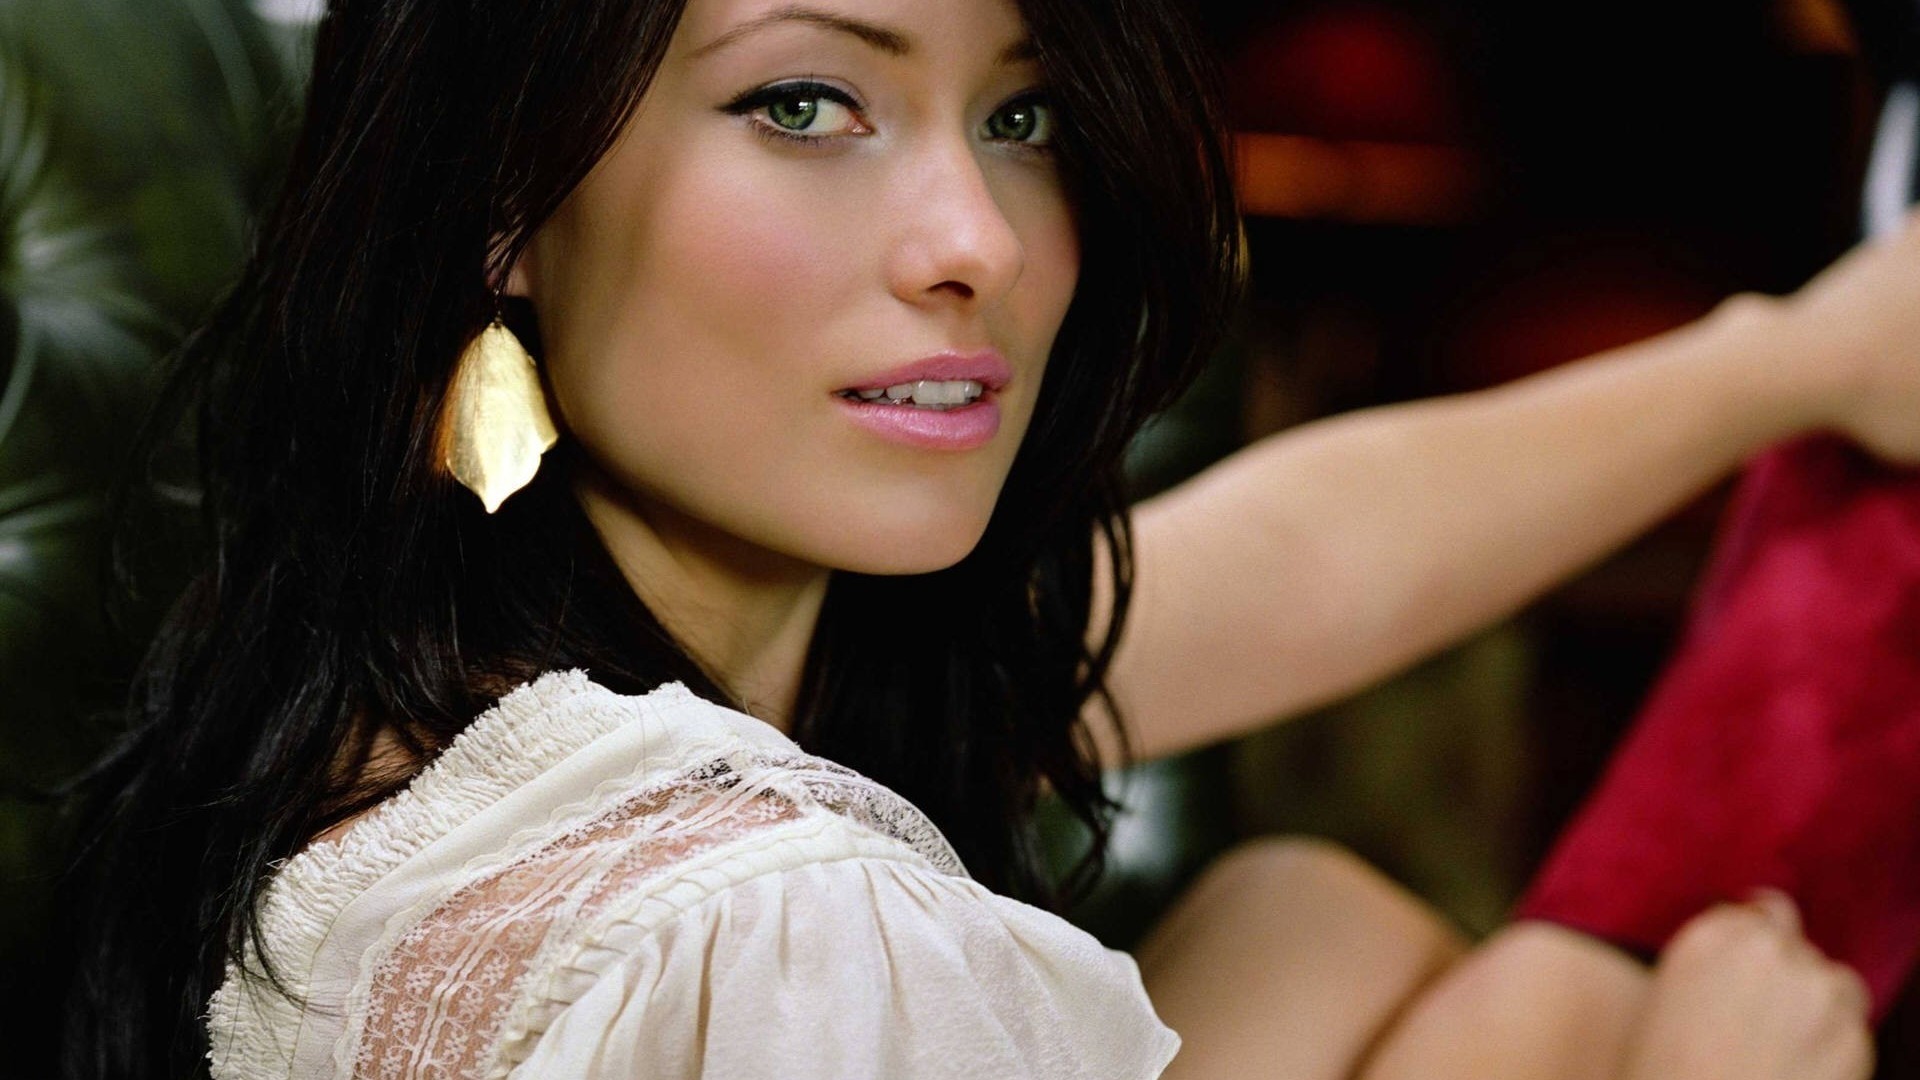 1920x1080 Download now full hd wallpaper olivia wilde natural green eyes pensive  actress ...